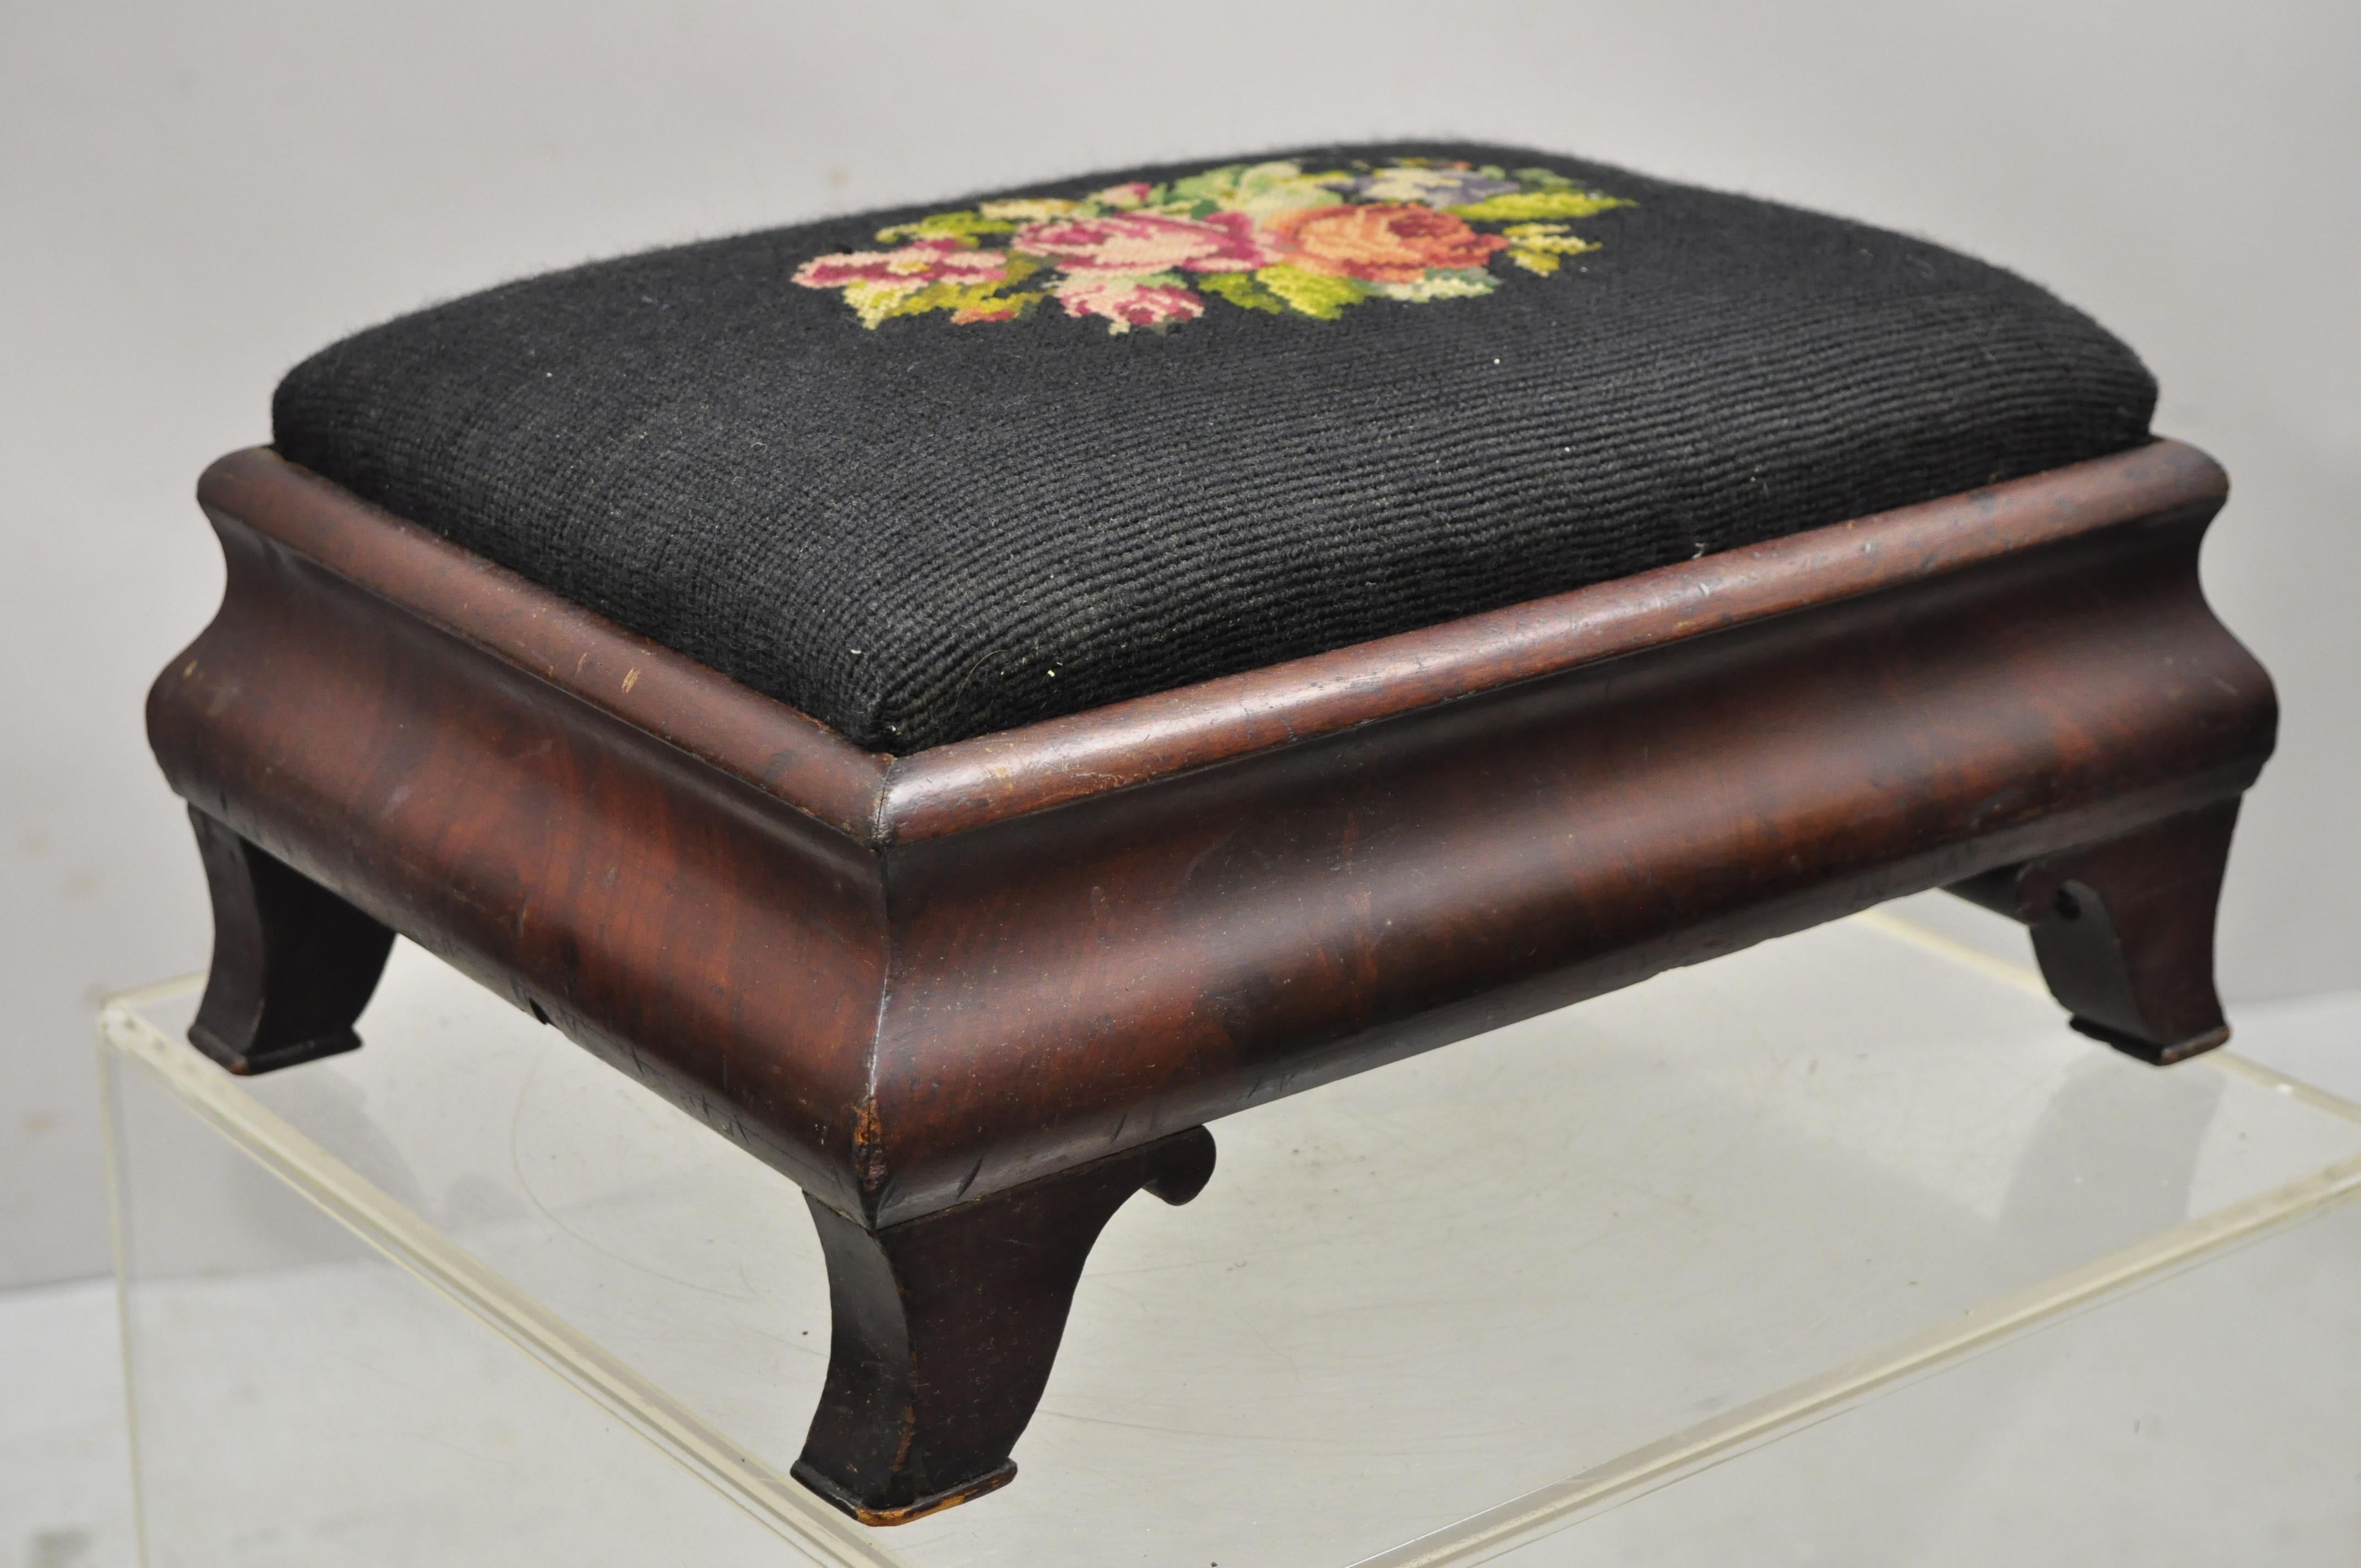 Antique Empire Crotch Mahogany Black Needlepoint small ottoman footstool. Item features black needlepoint seat with flower design, beautiful wood grain, shapely saber legs, very nice antique item, great style and form. Circa 19th Century.